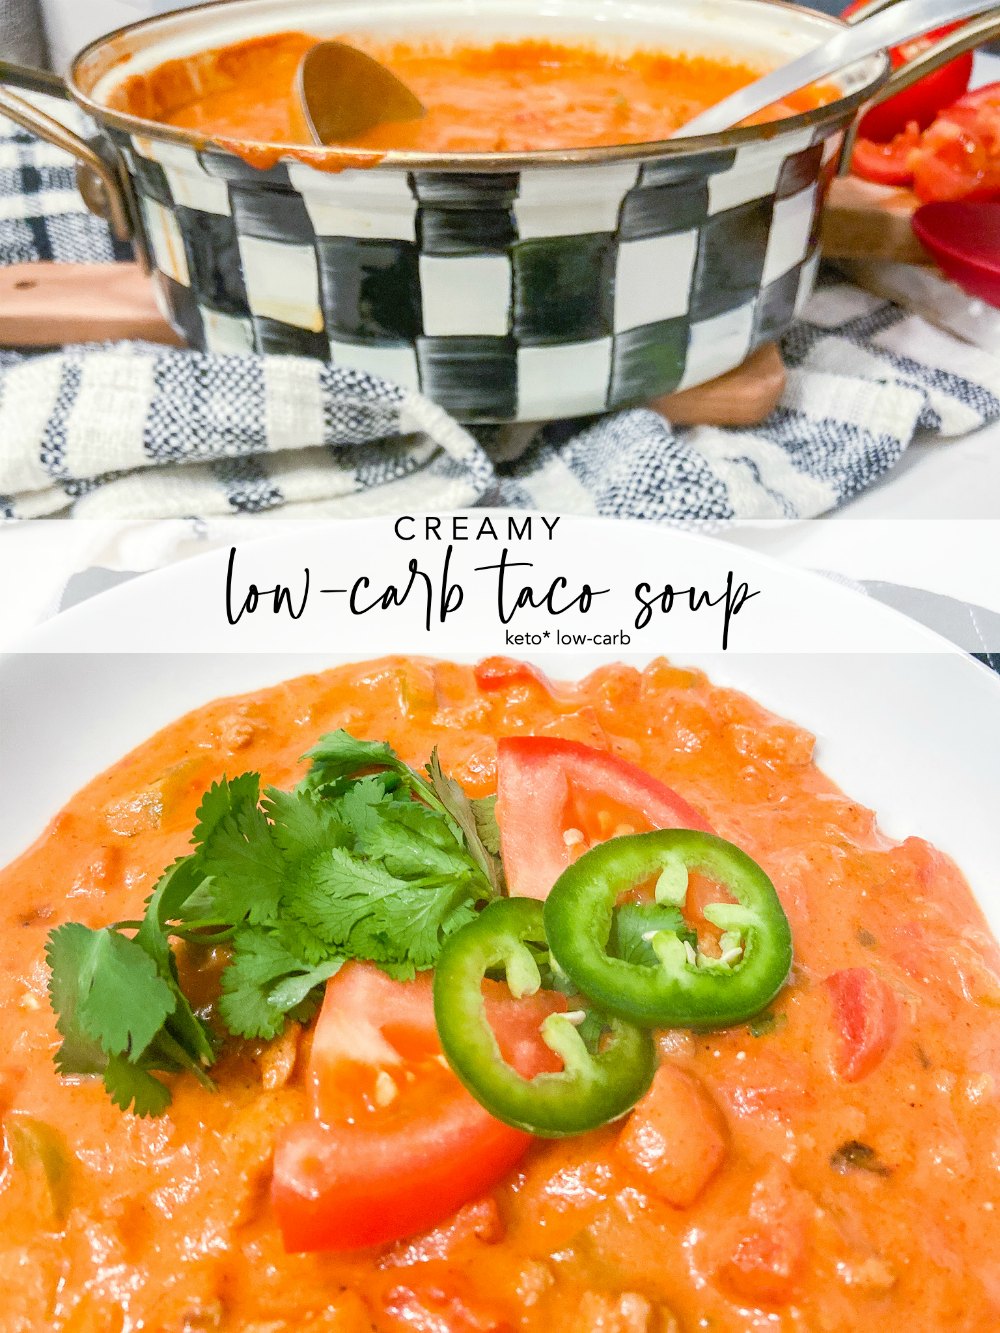 Low-Carb Creamy Taco Soup (Keto). Creamy taco soup filled with veggies and spicy taco flavor! 